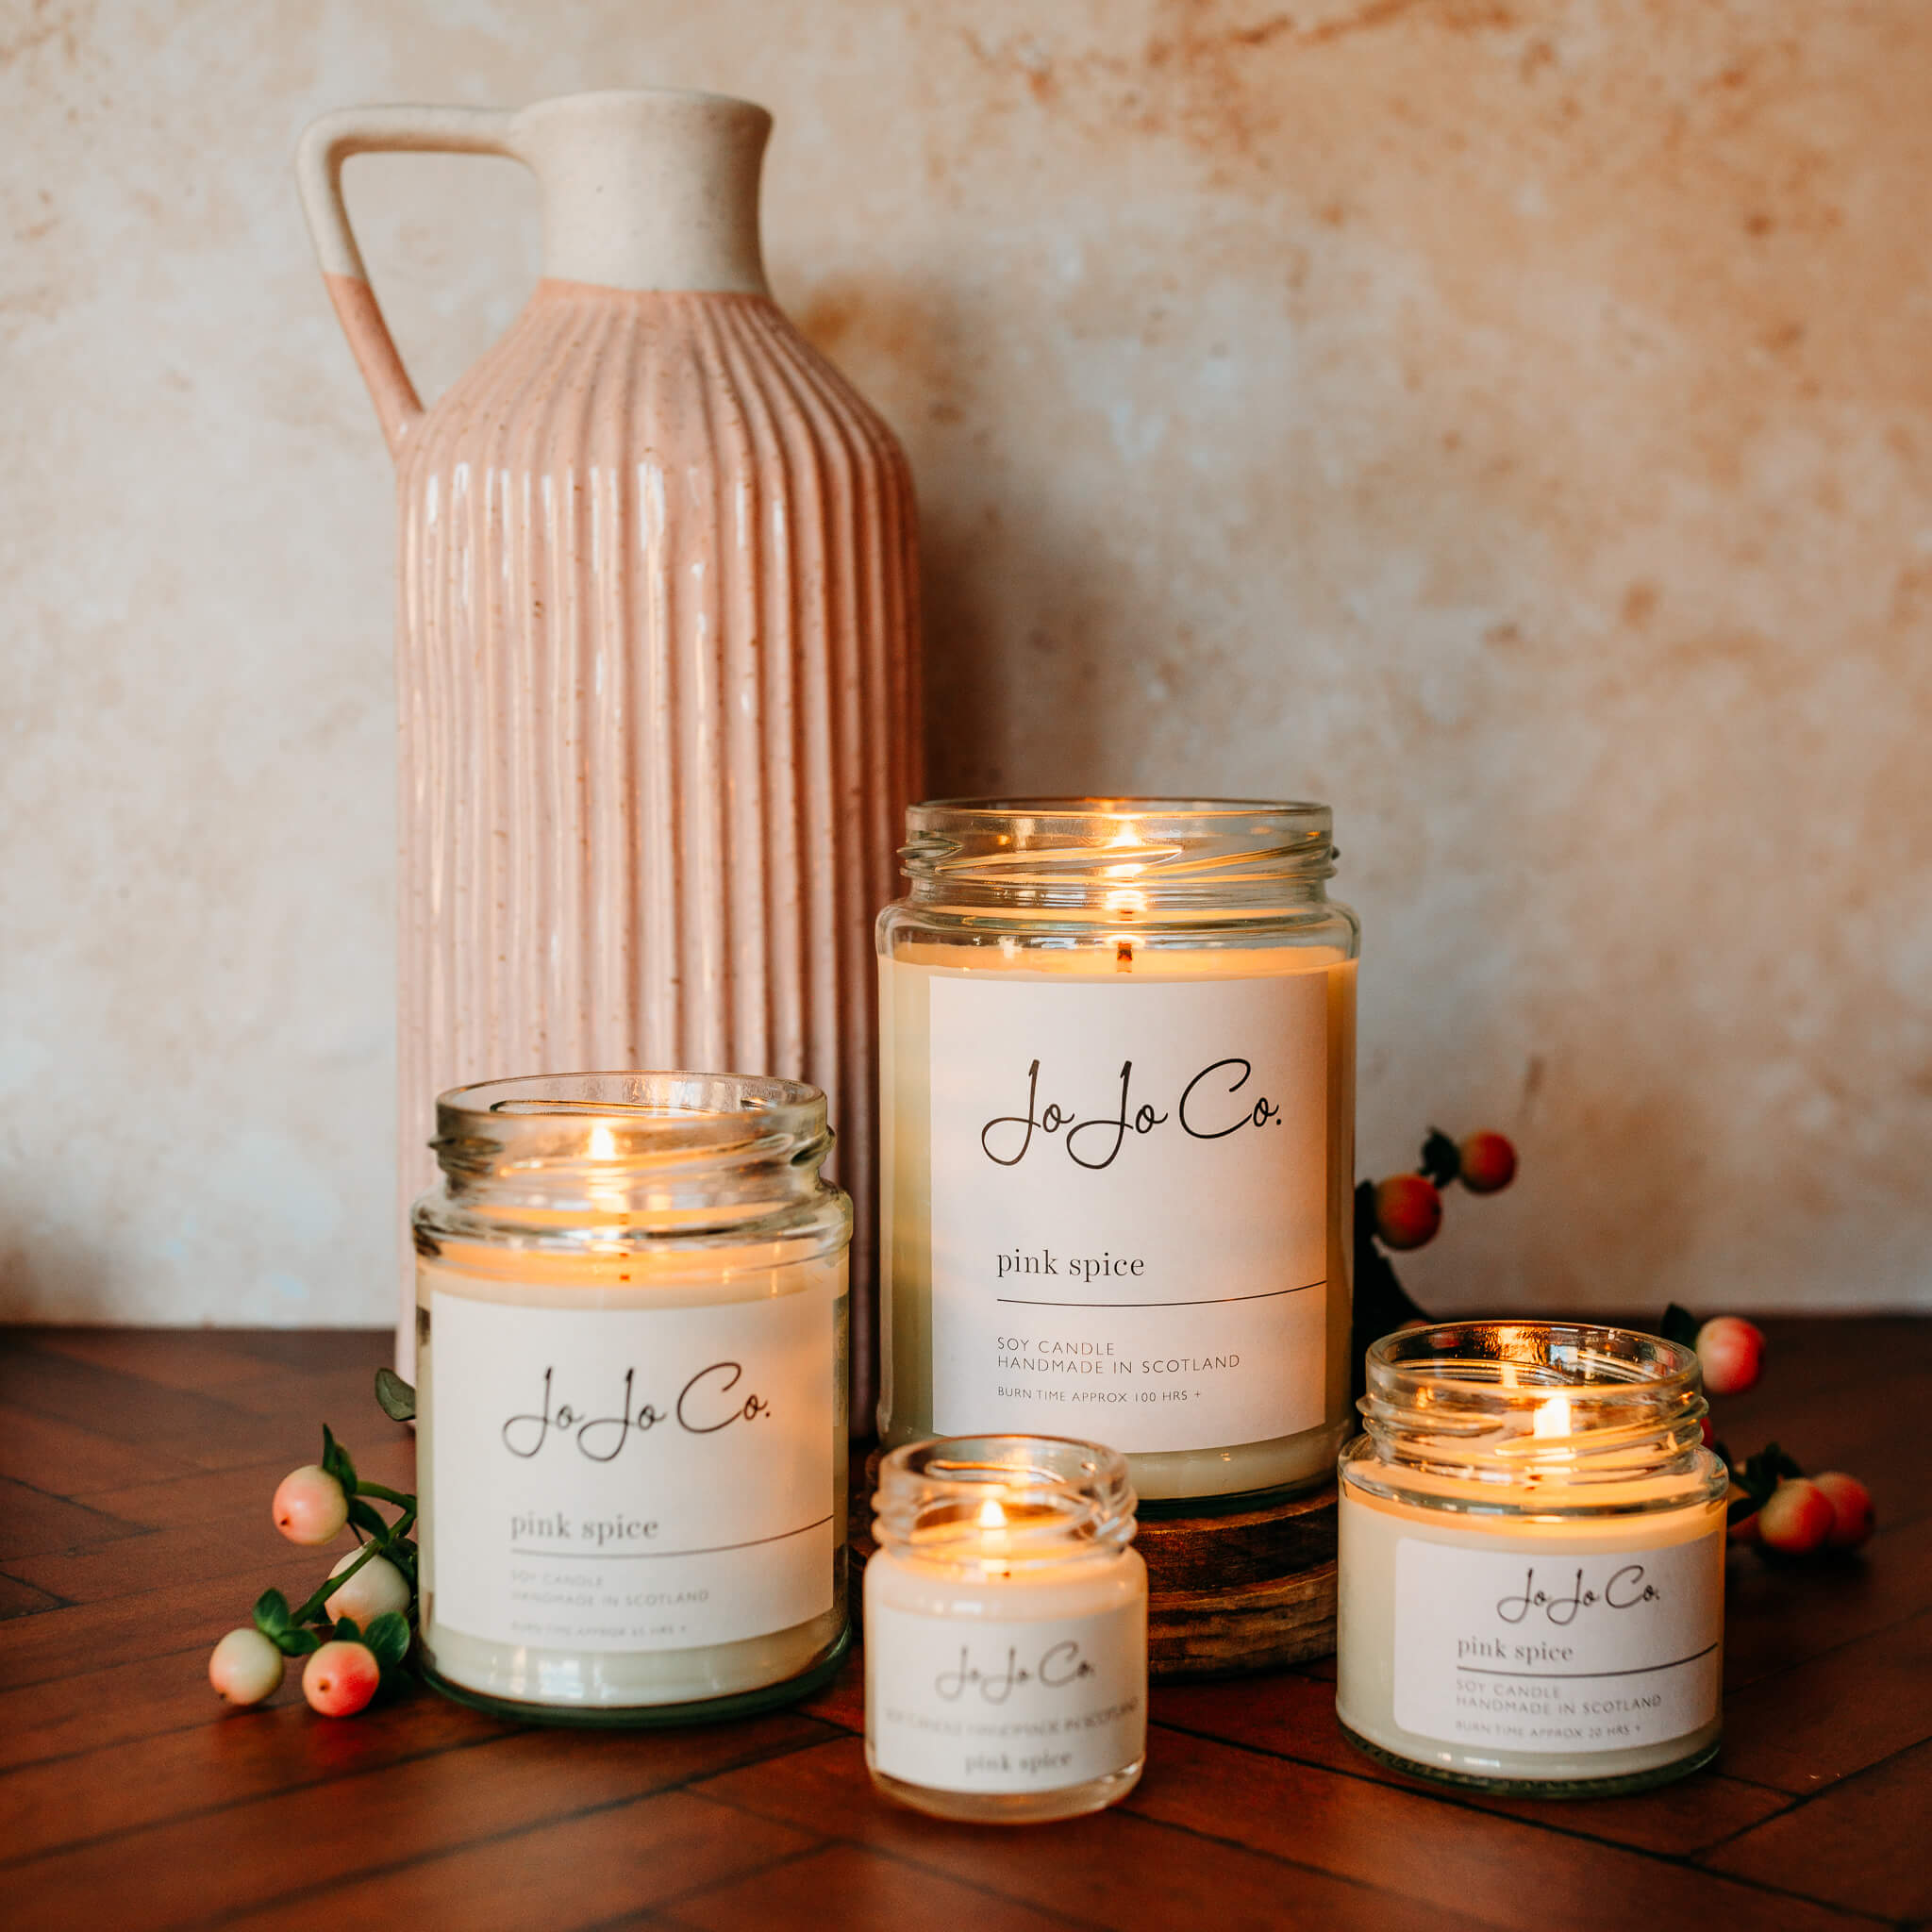 A group of lit JoJo Co Pink Spice candles in jars